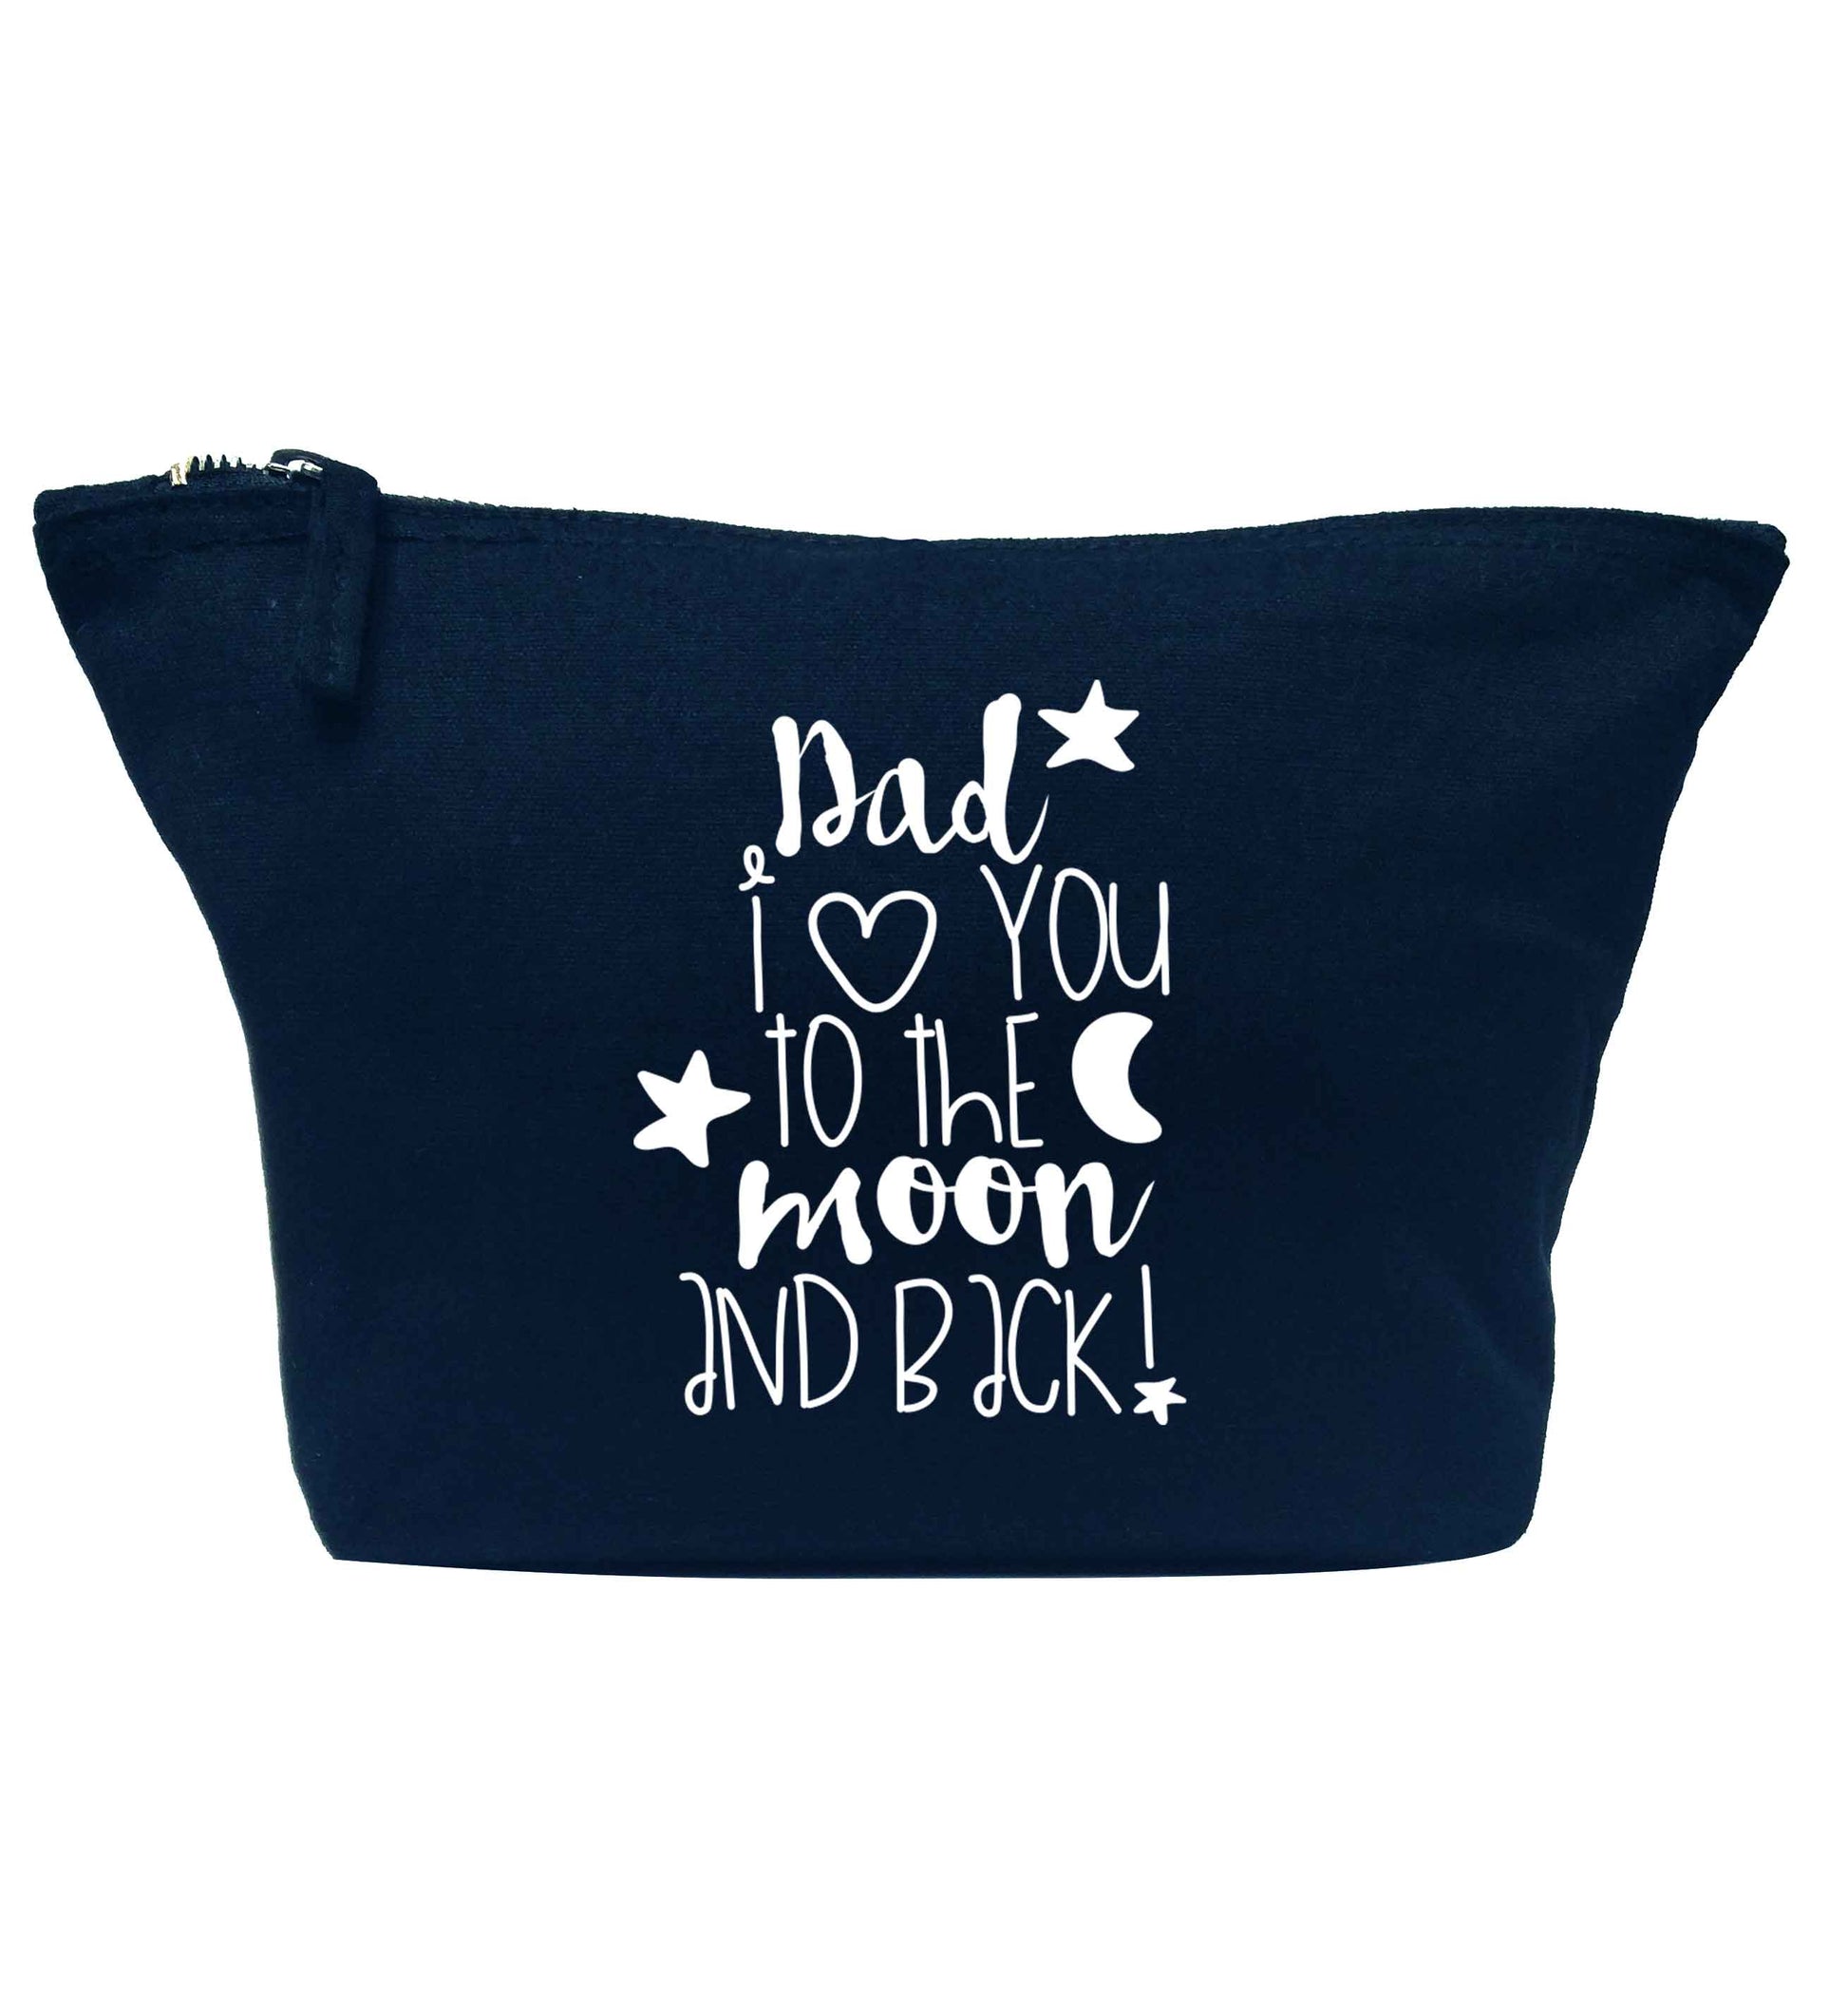 Dad I love you to the moon and back navy makeup bag